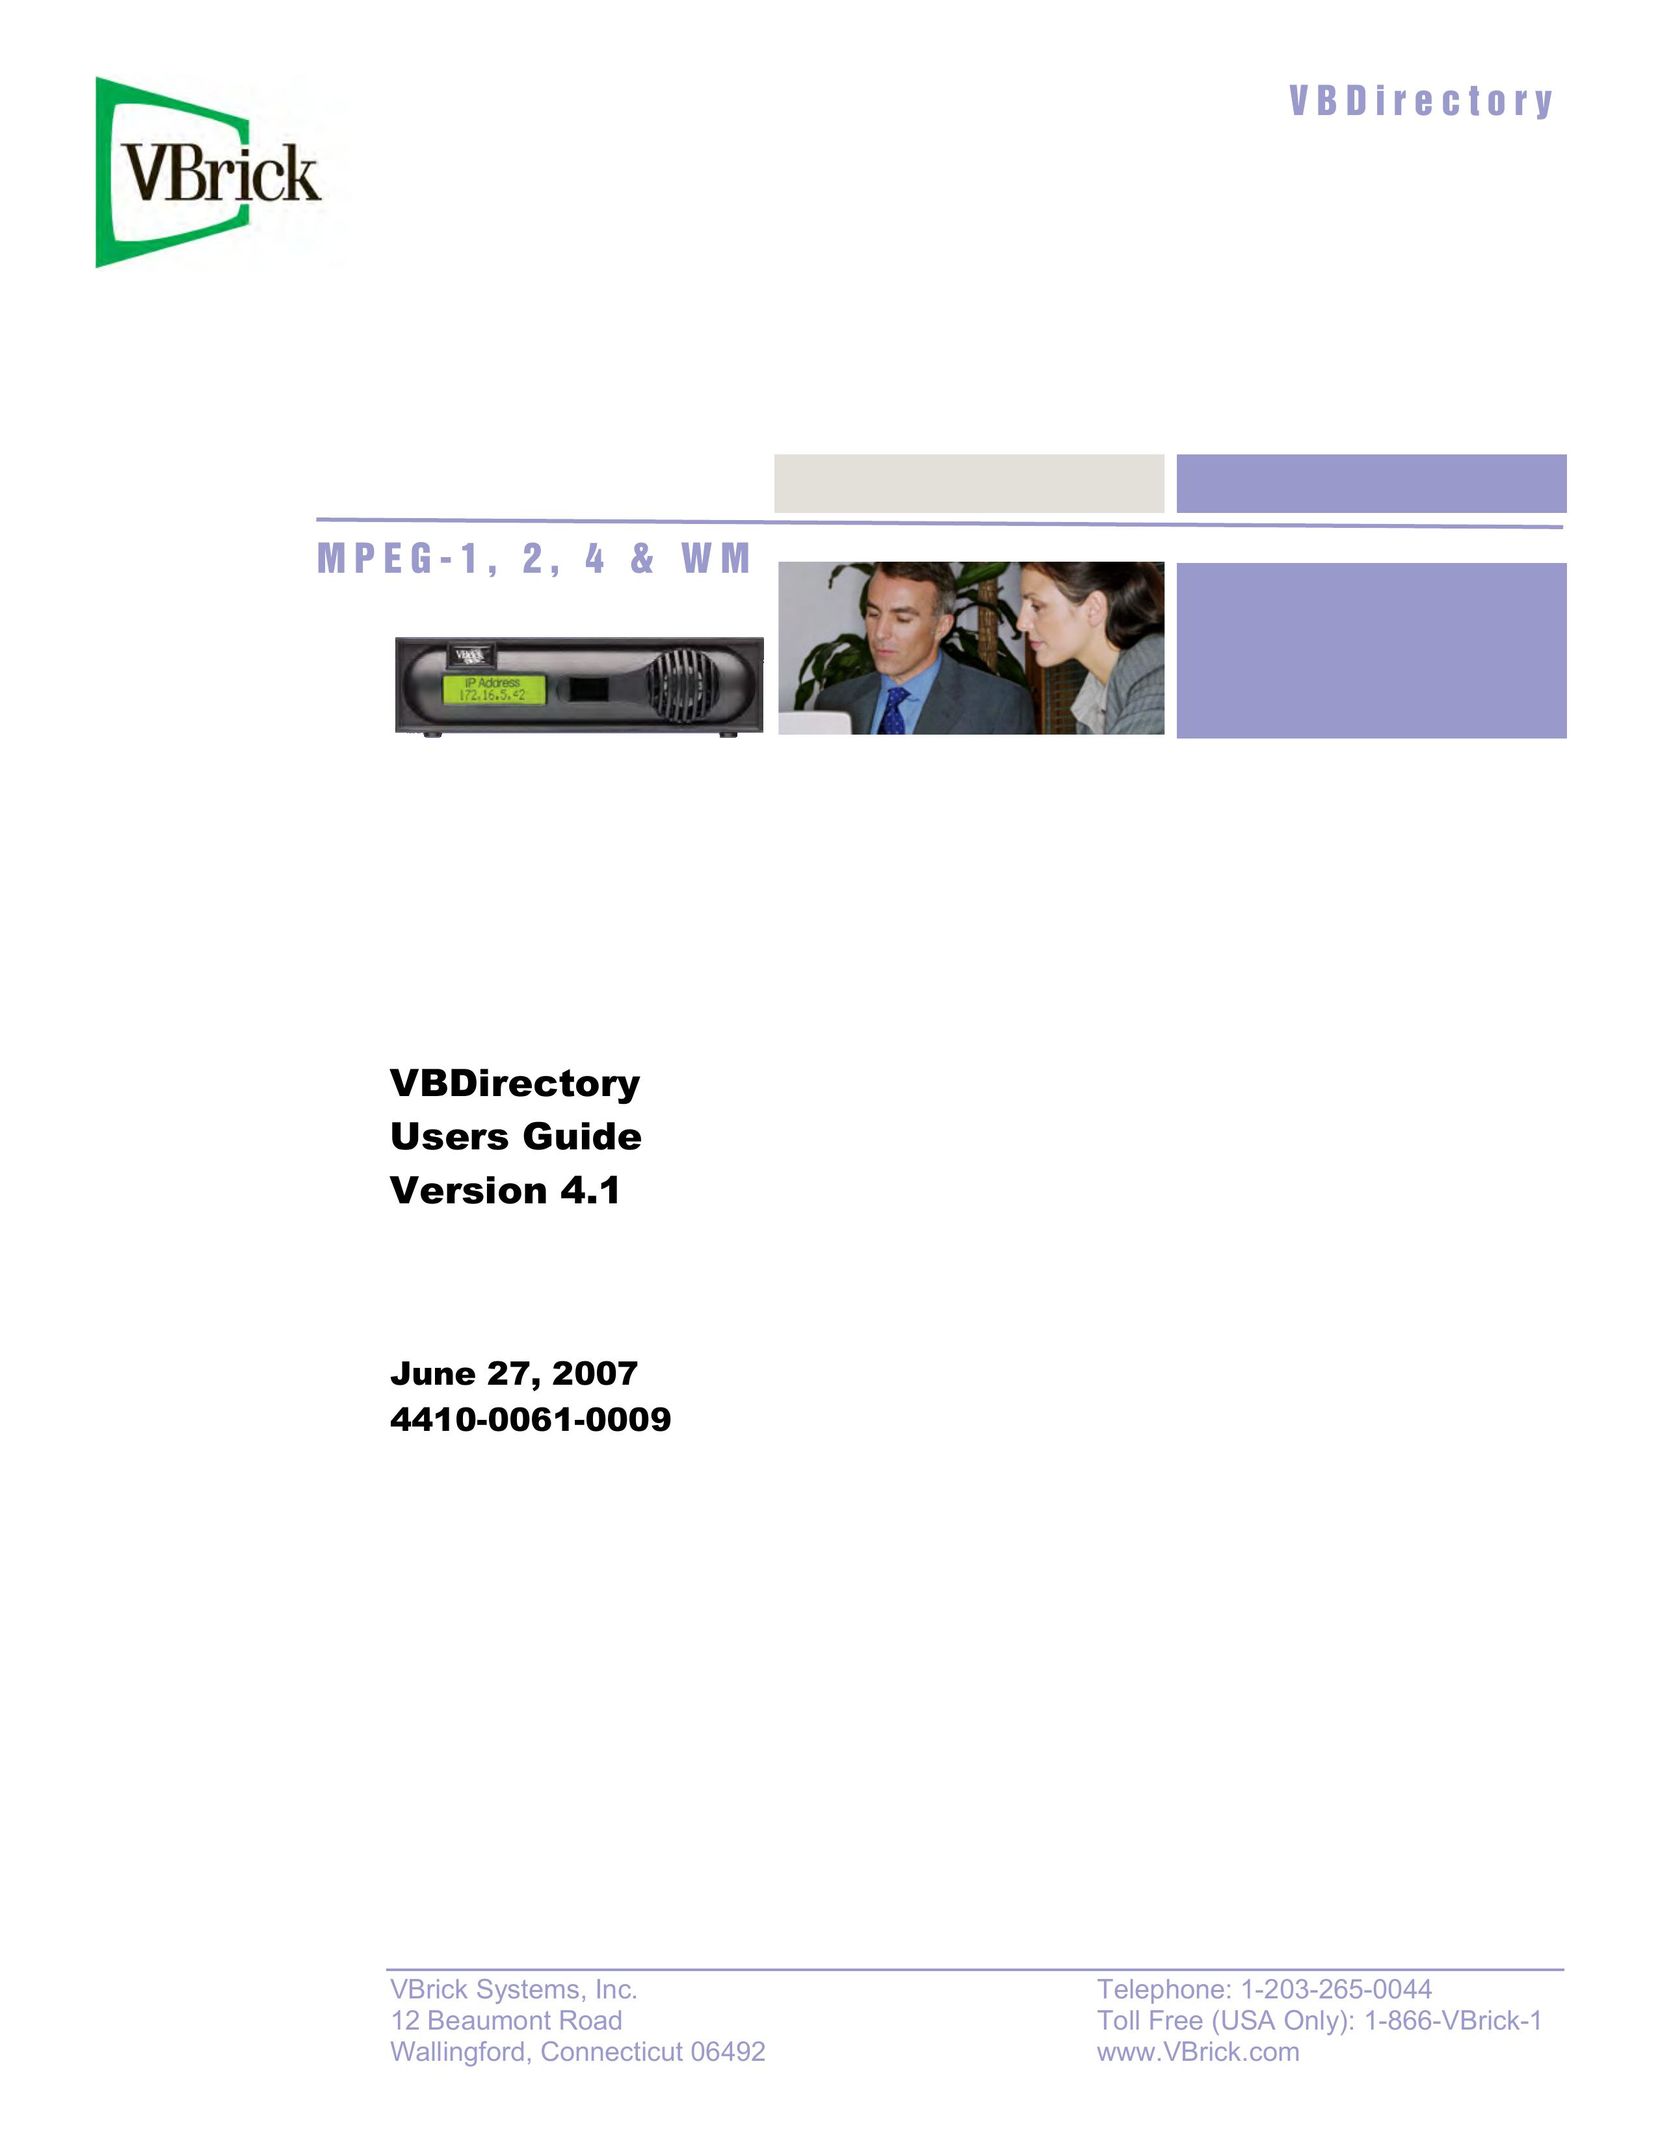 VBrick Systems VB Directory System Network Router User Manual